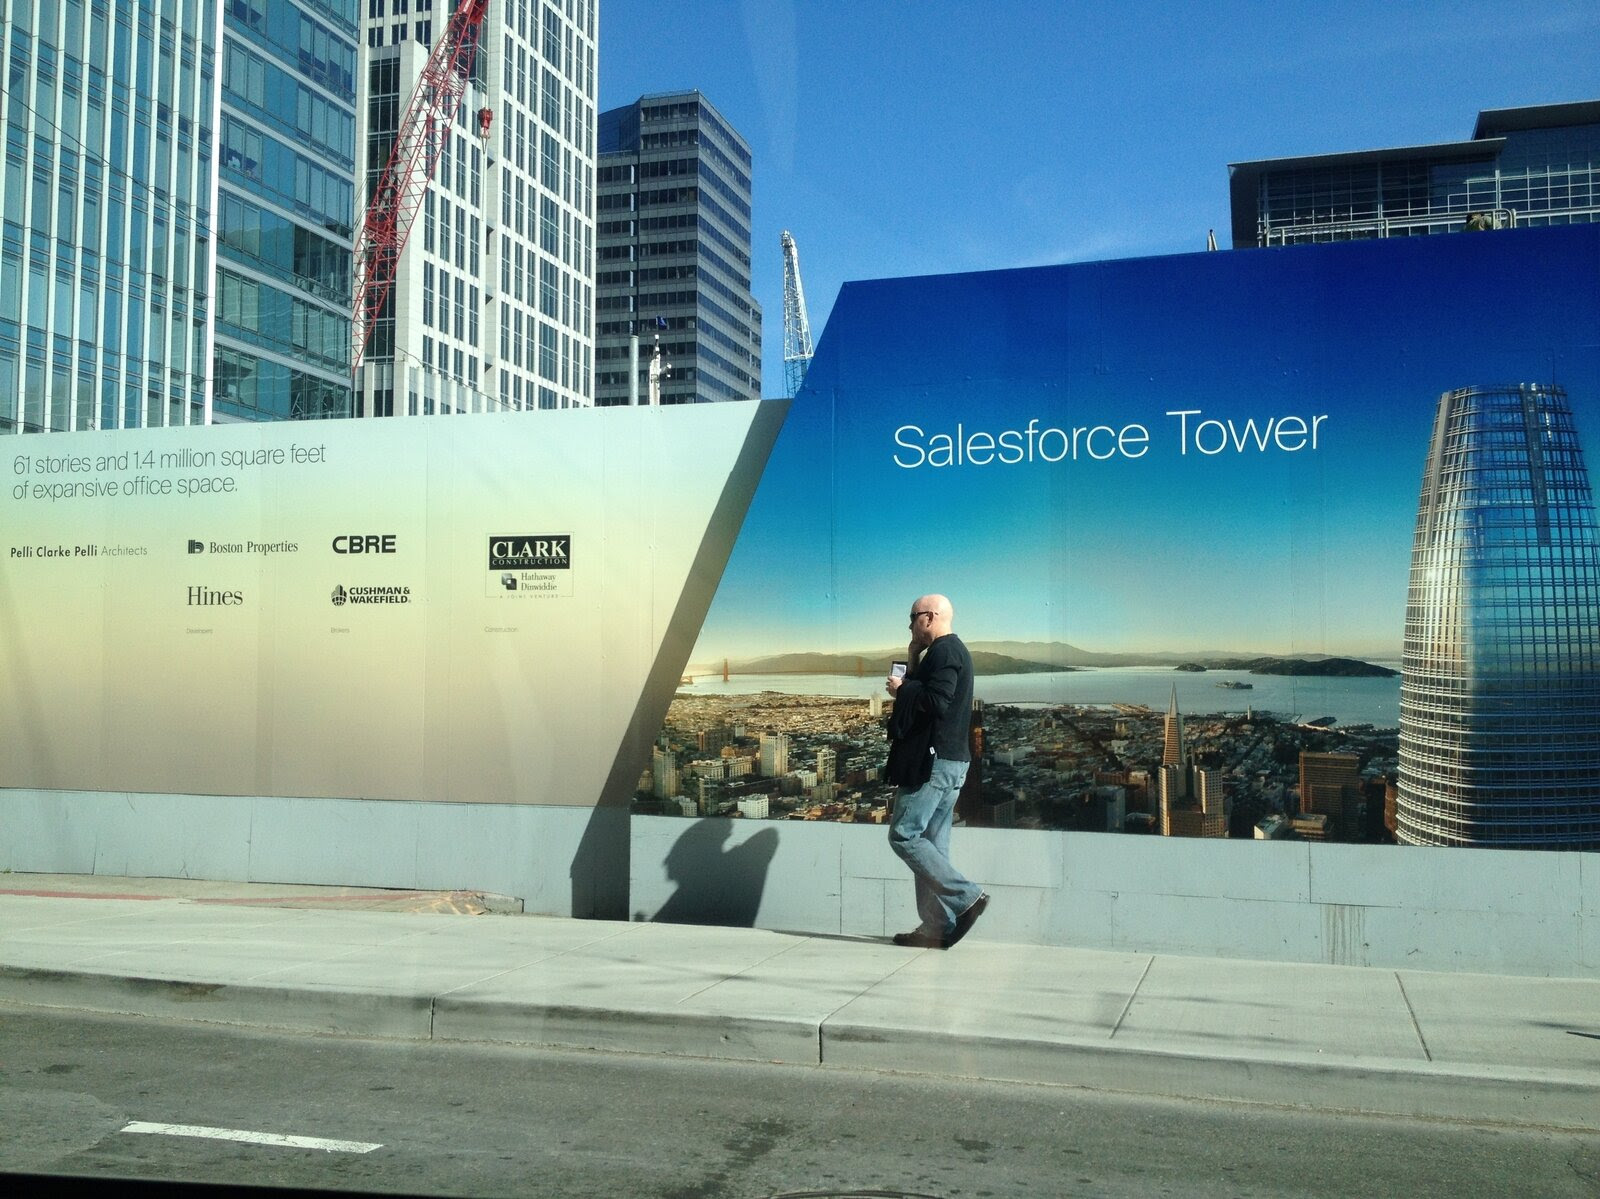 The Salesforce Tower under construction will be the tallest in the Bay Area when completed.